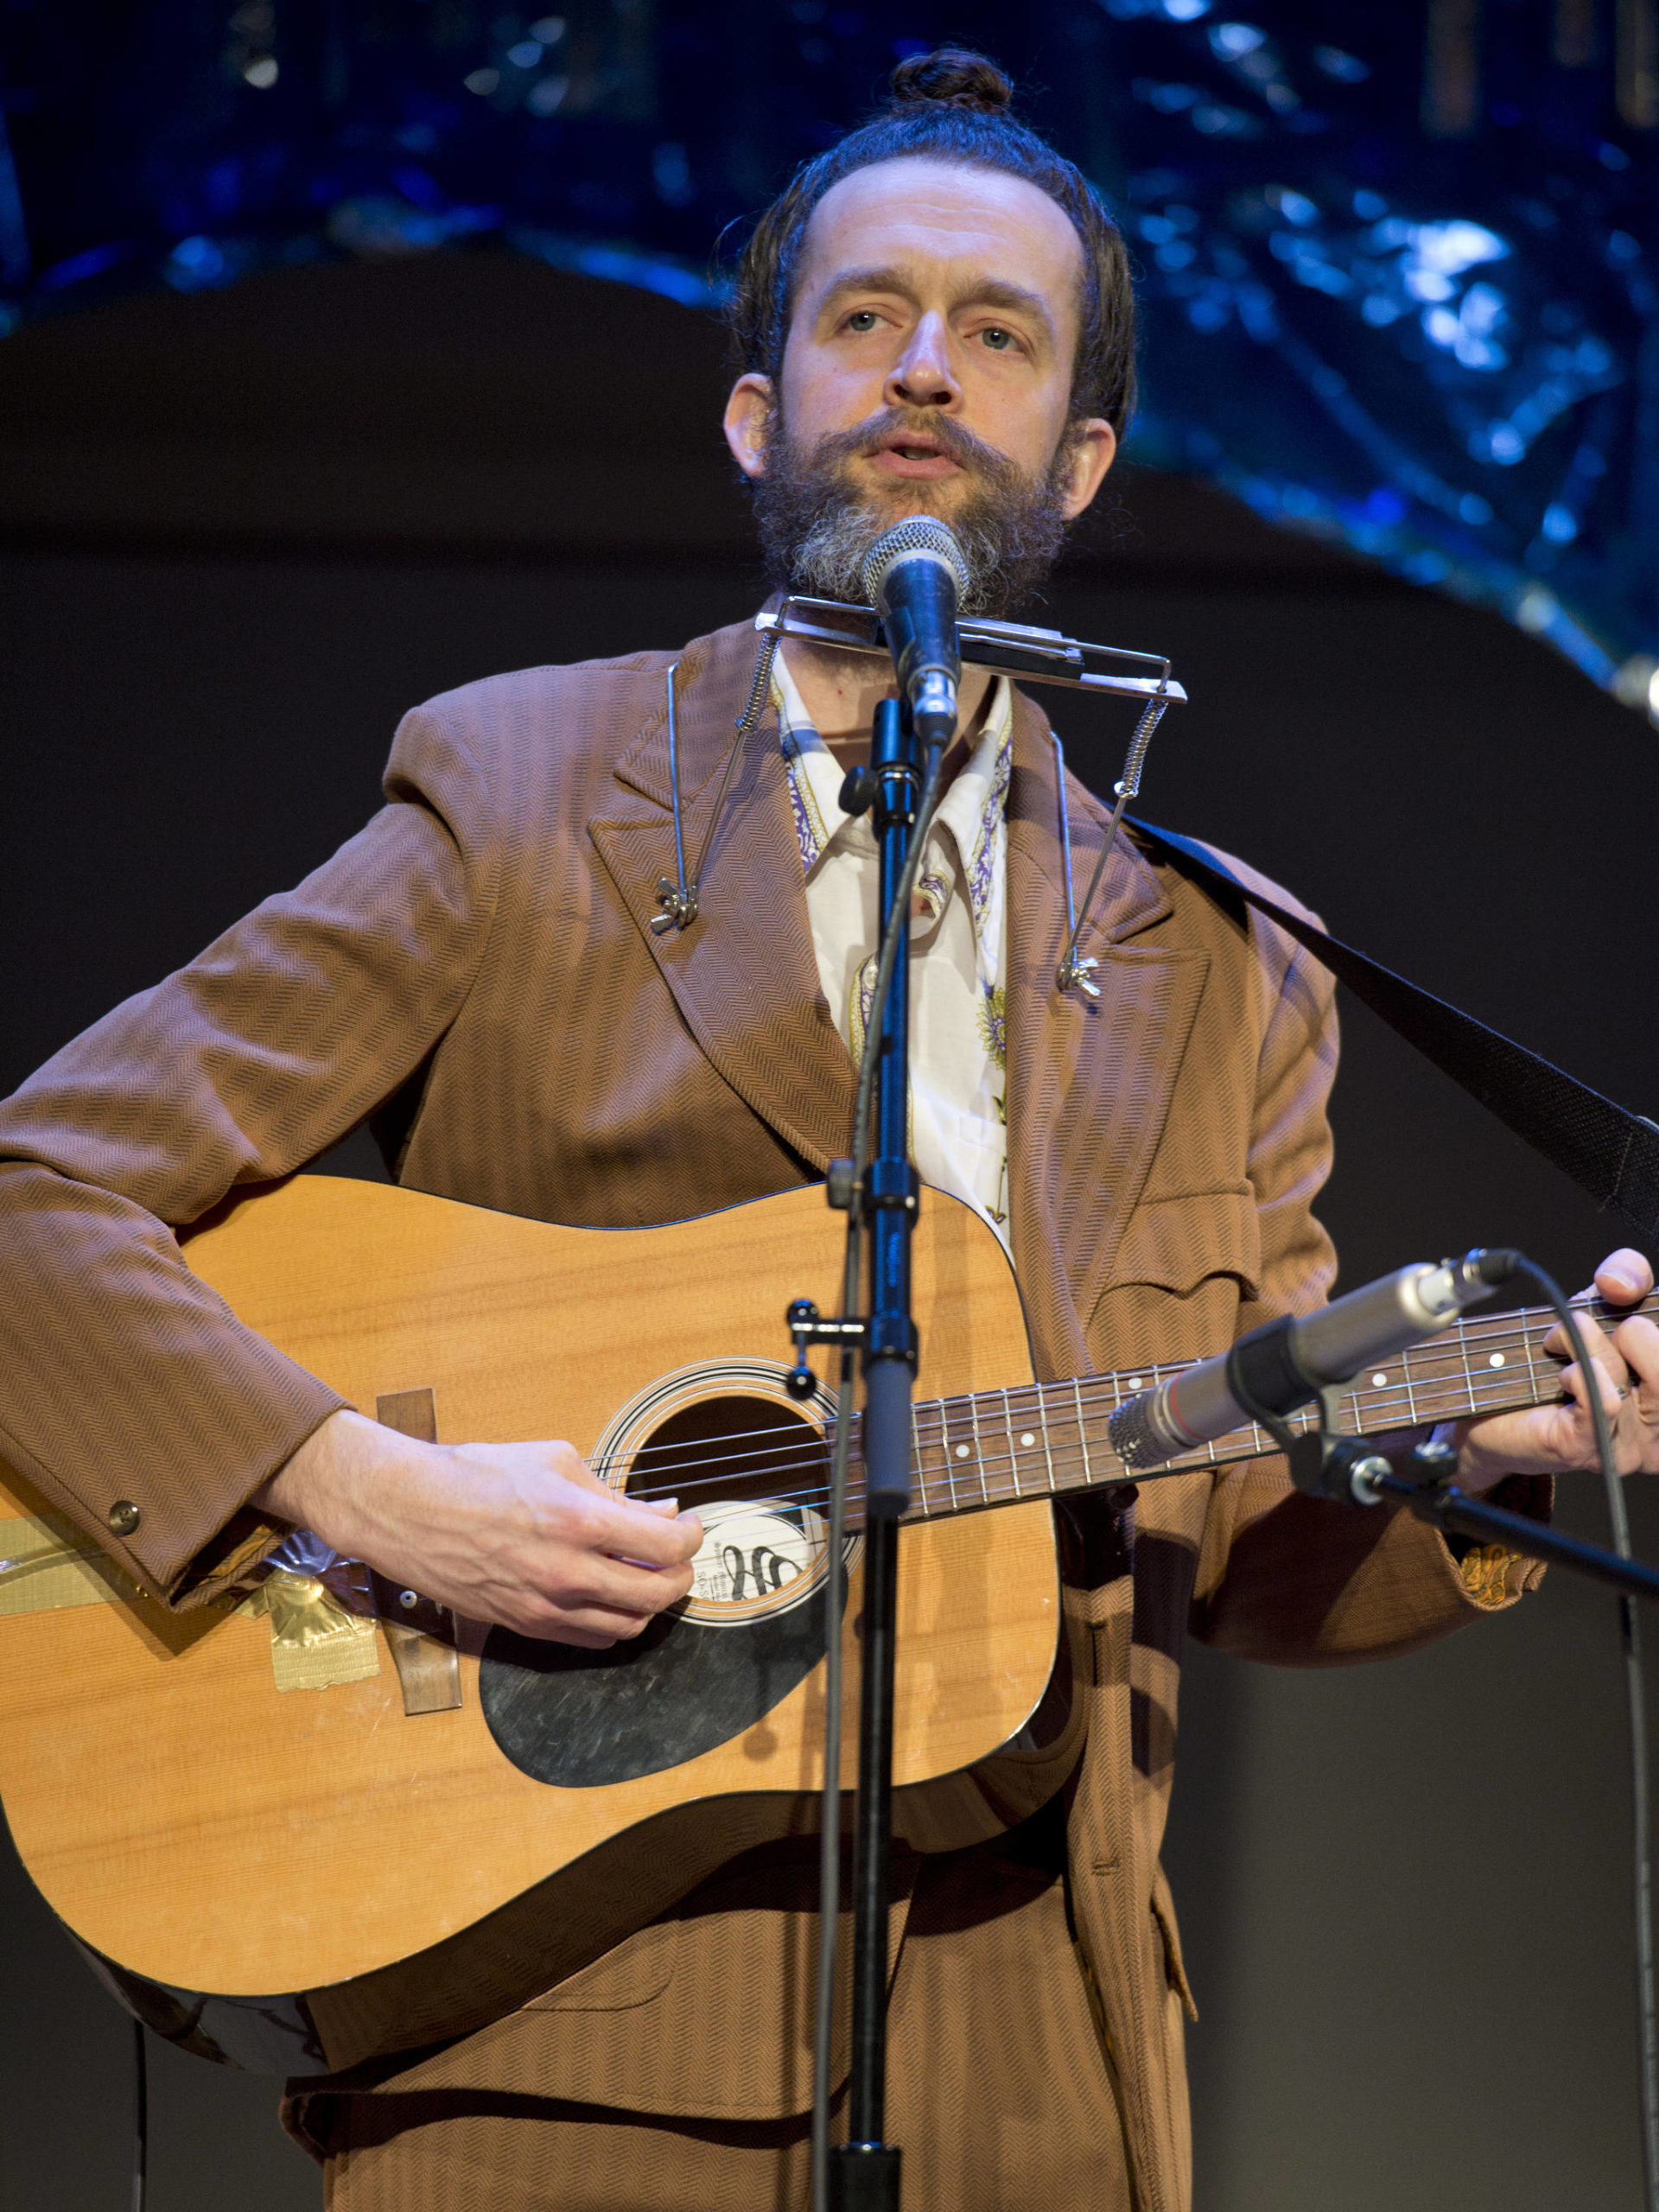 Michael Penn | Juneau Empire File                                 George Kuhar, seen here at the 43rd annual Alaska Folk Festival in April 2017, will perform at Mountainside Open Mic & Art Night at The Rookery Cafe on Wednesday. Details in Wednesday’s listing.